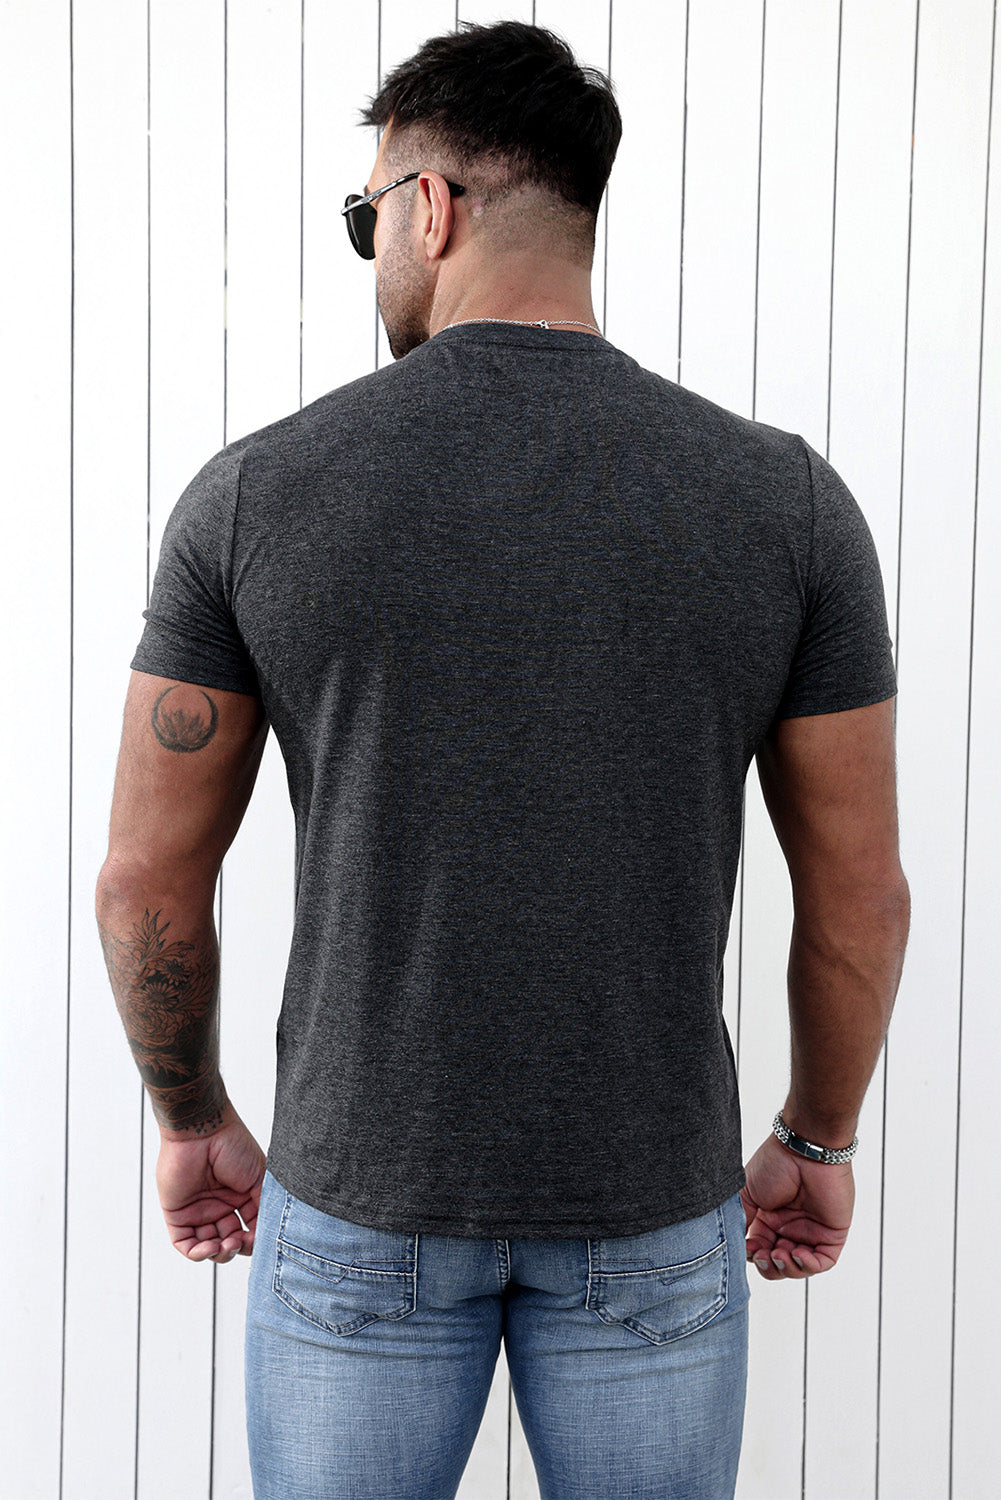 Gray Here's A Really Old Picture Of Me Men's Slim Fit T Shirt Men's Tops JT's Designer Fashion